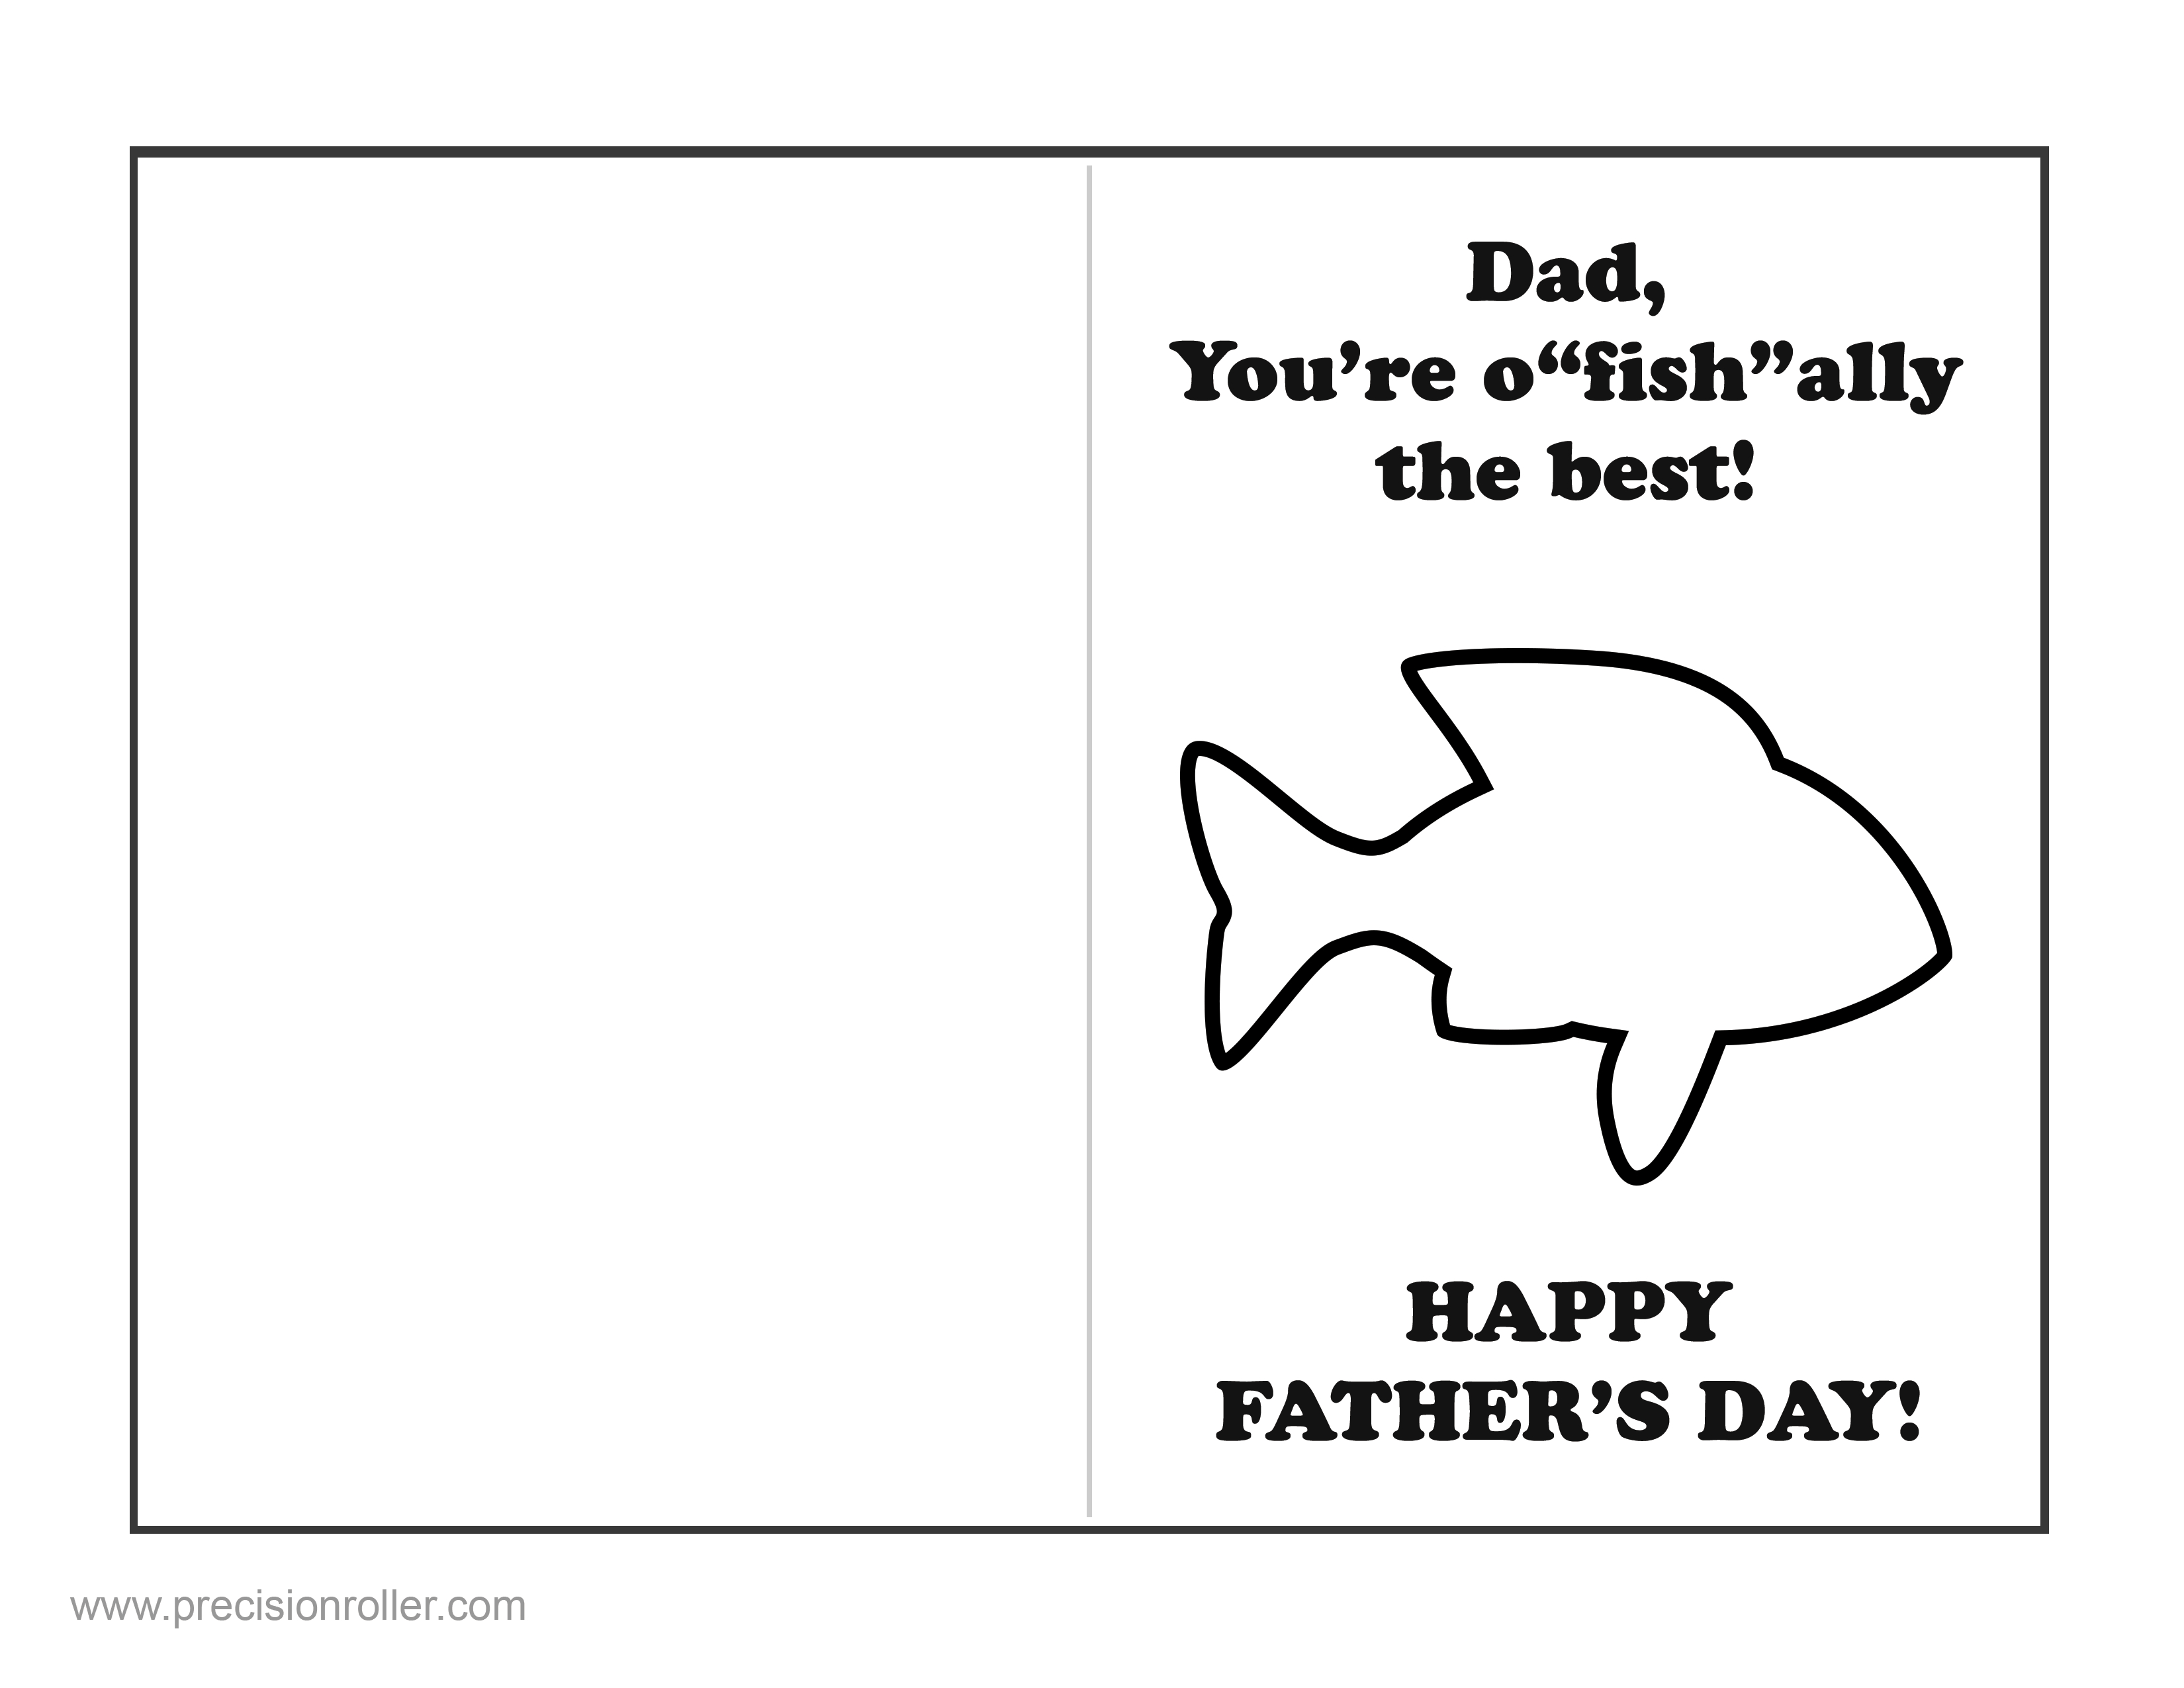 Image Result For Father's Day Card Template | Fathers Day Intended For Fathers Day Card Template